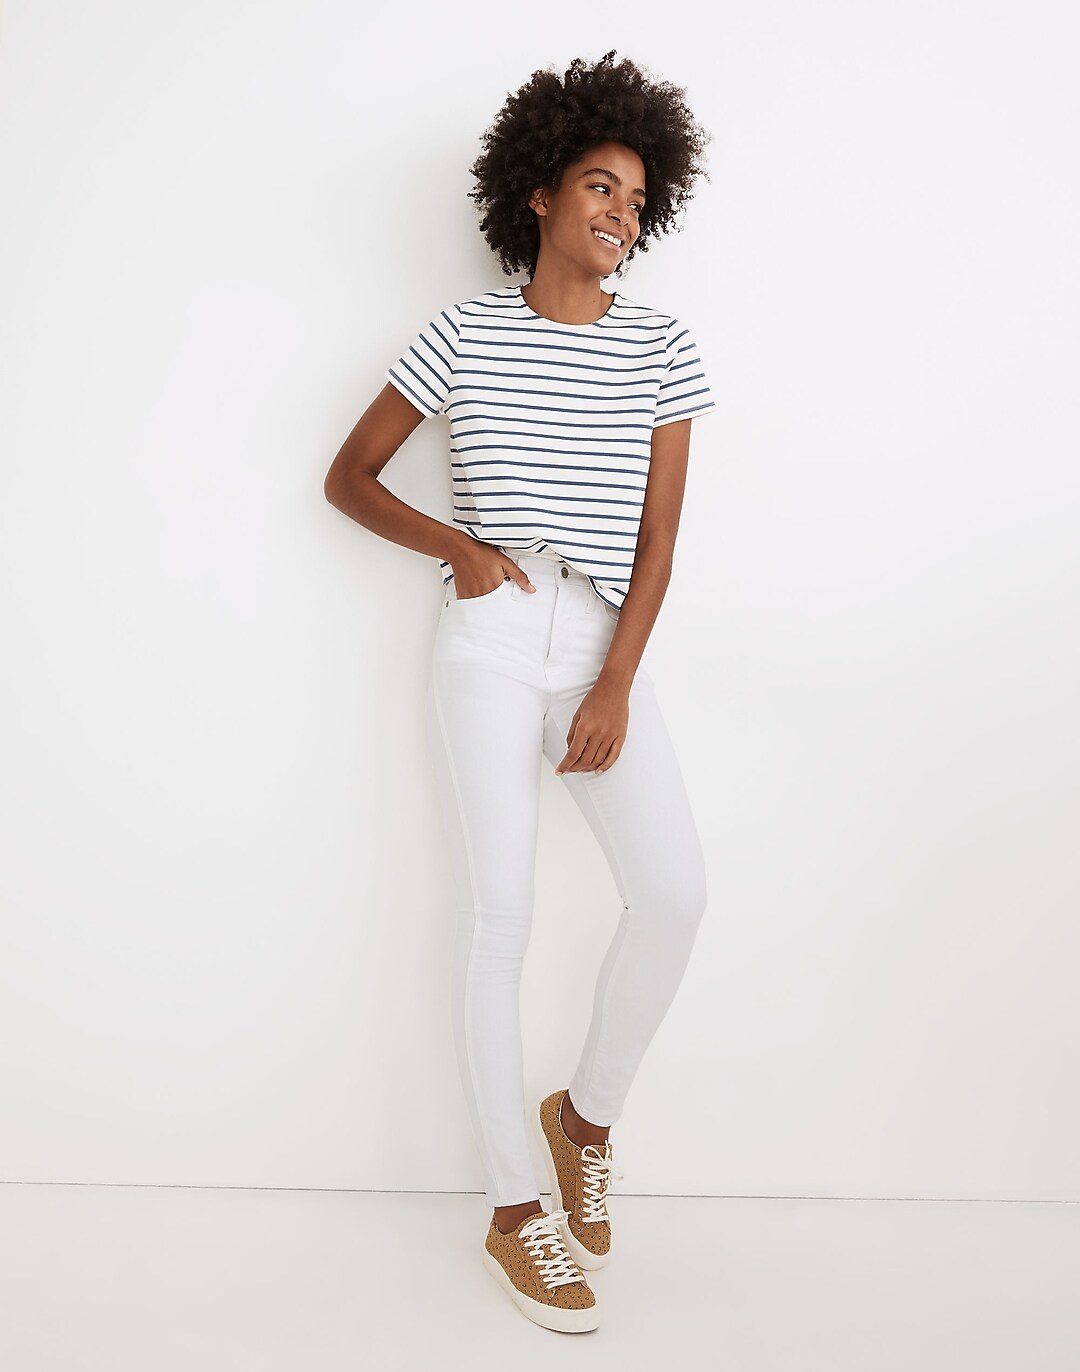 Madewell New Magic Pockets Skinny Jeans Reviews